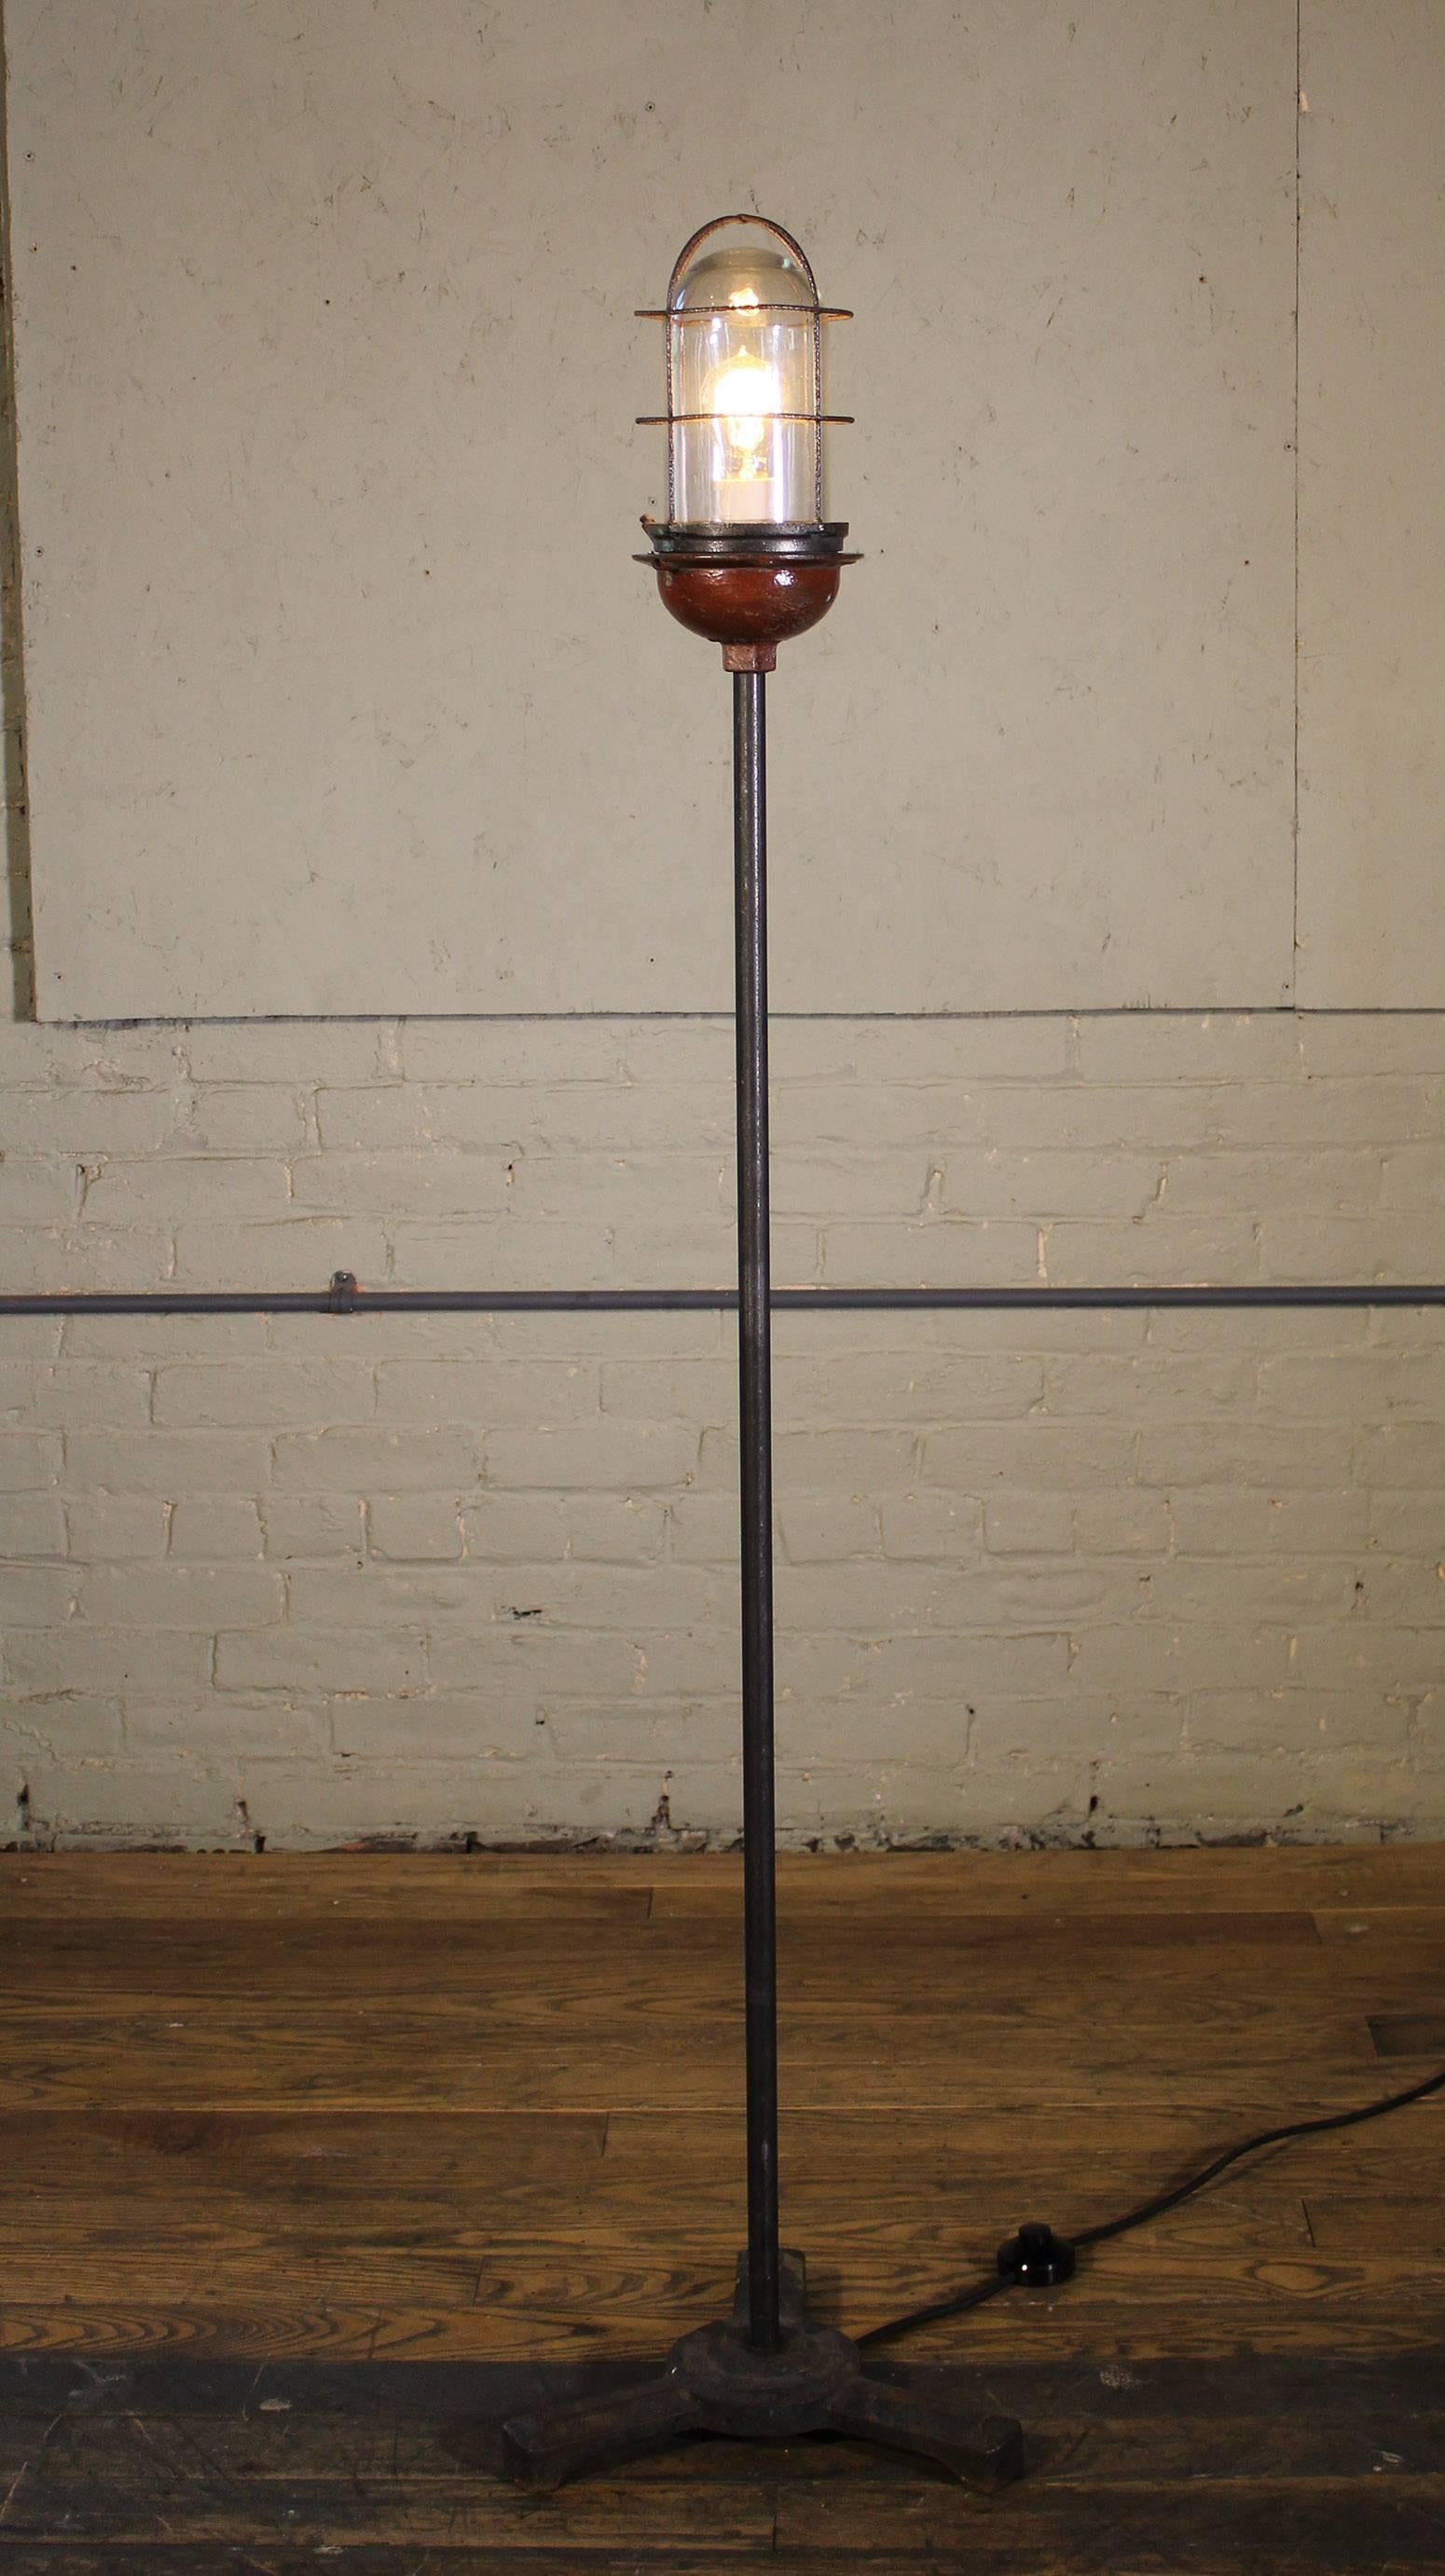 Cast Ghost Light, Theater Stage Floor Lamp, Glass, Iron and Steel, Vintage Industrial